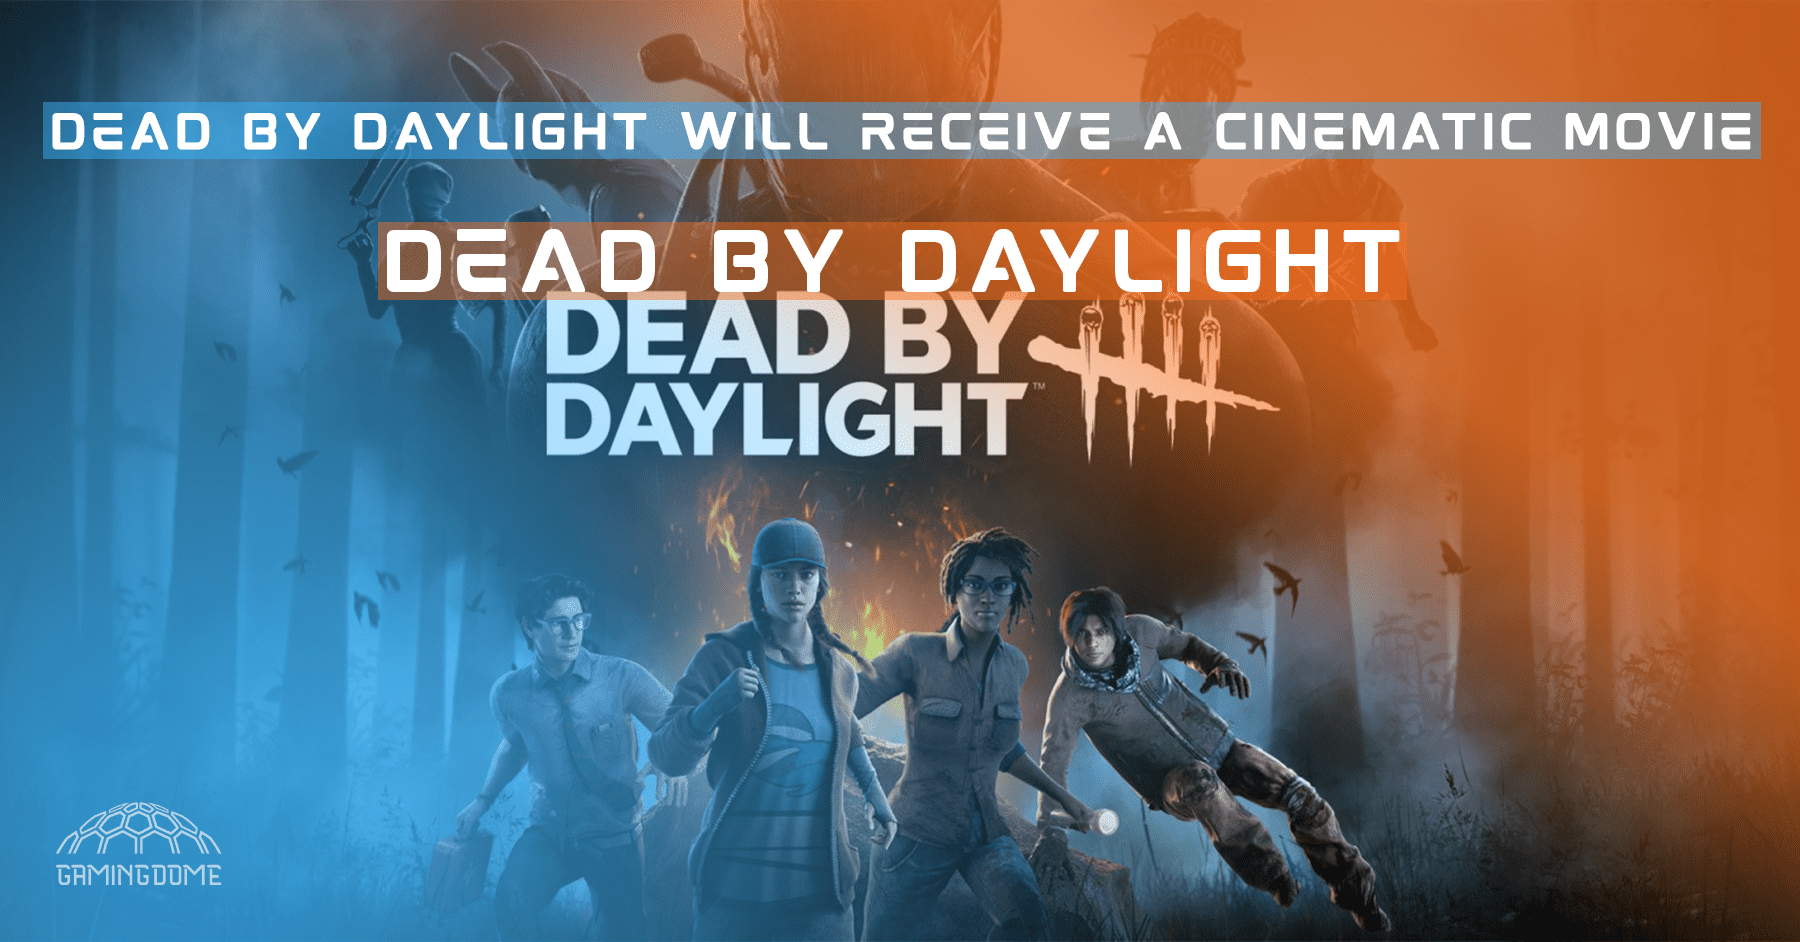 DEAD BY DAYLIGHT WILL RECEIVE A CINEMATIC MOVIE